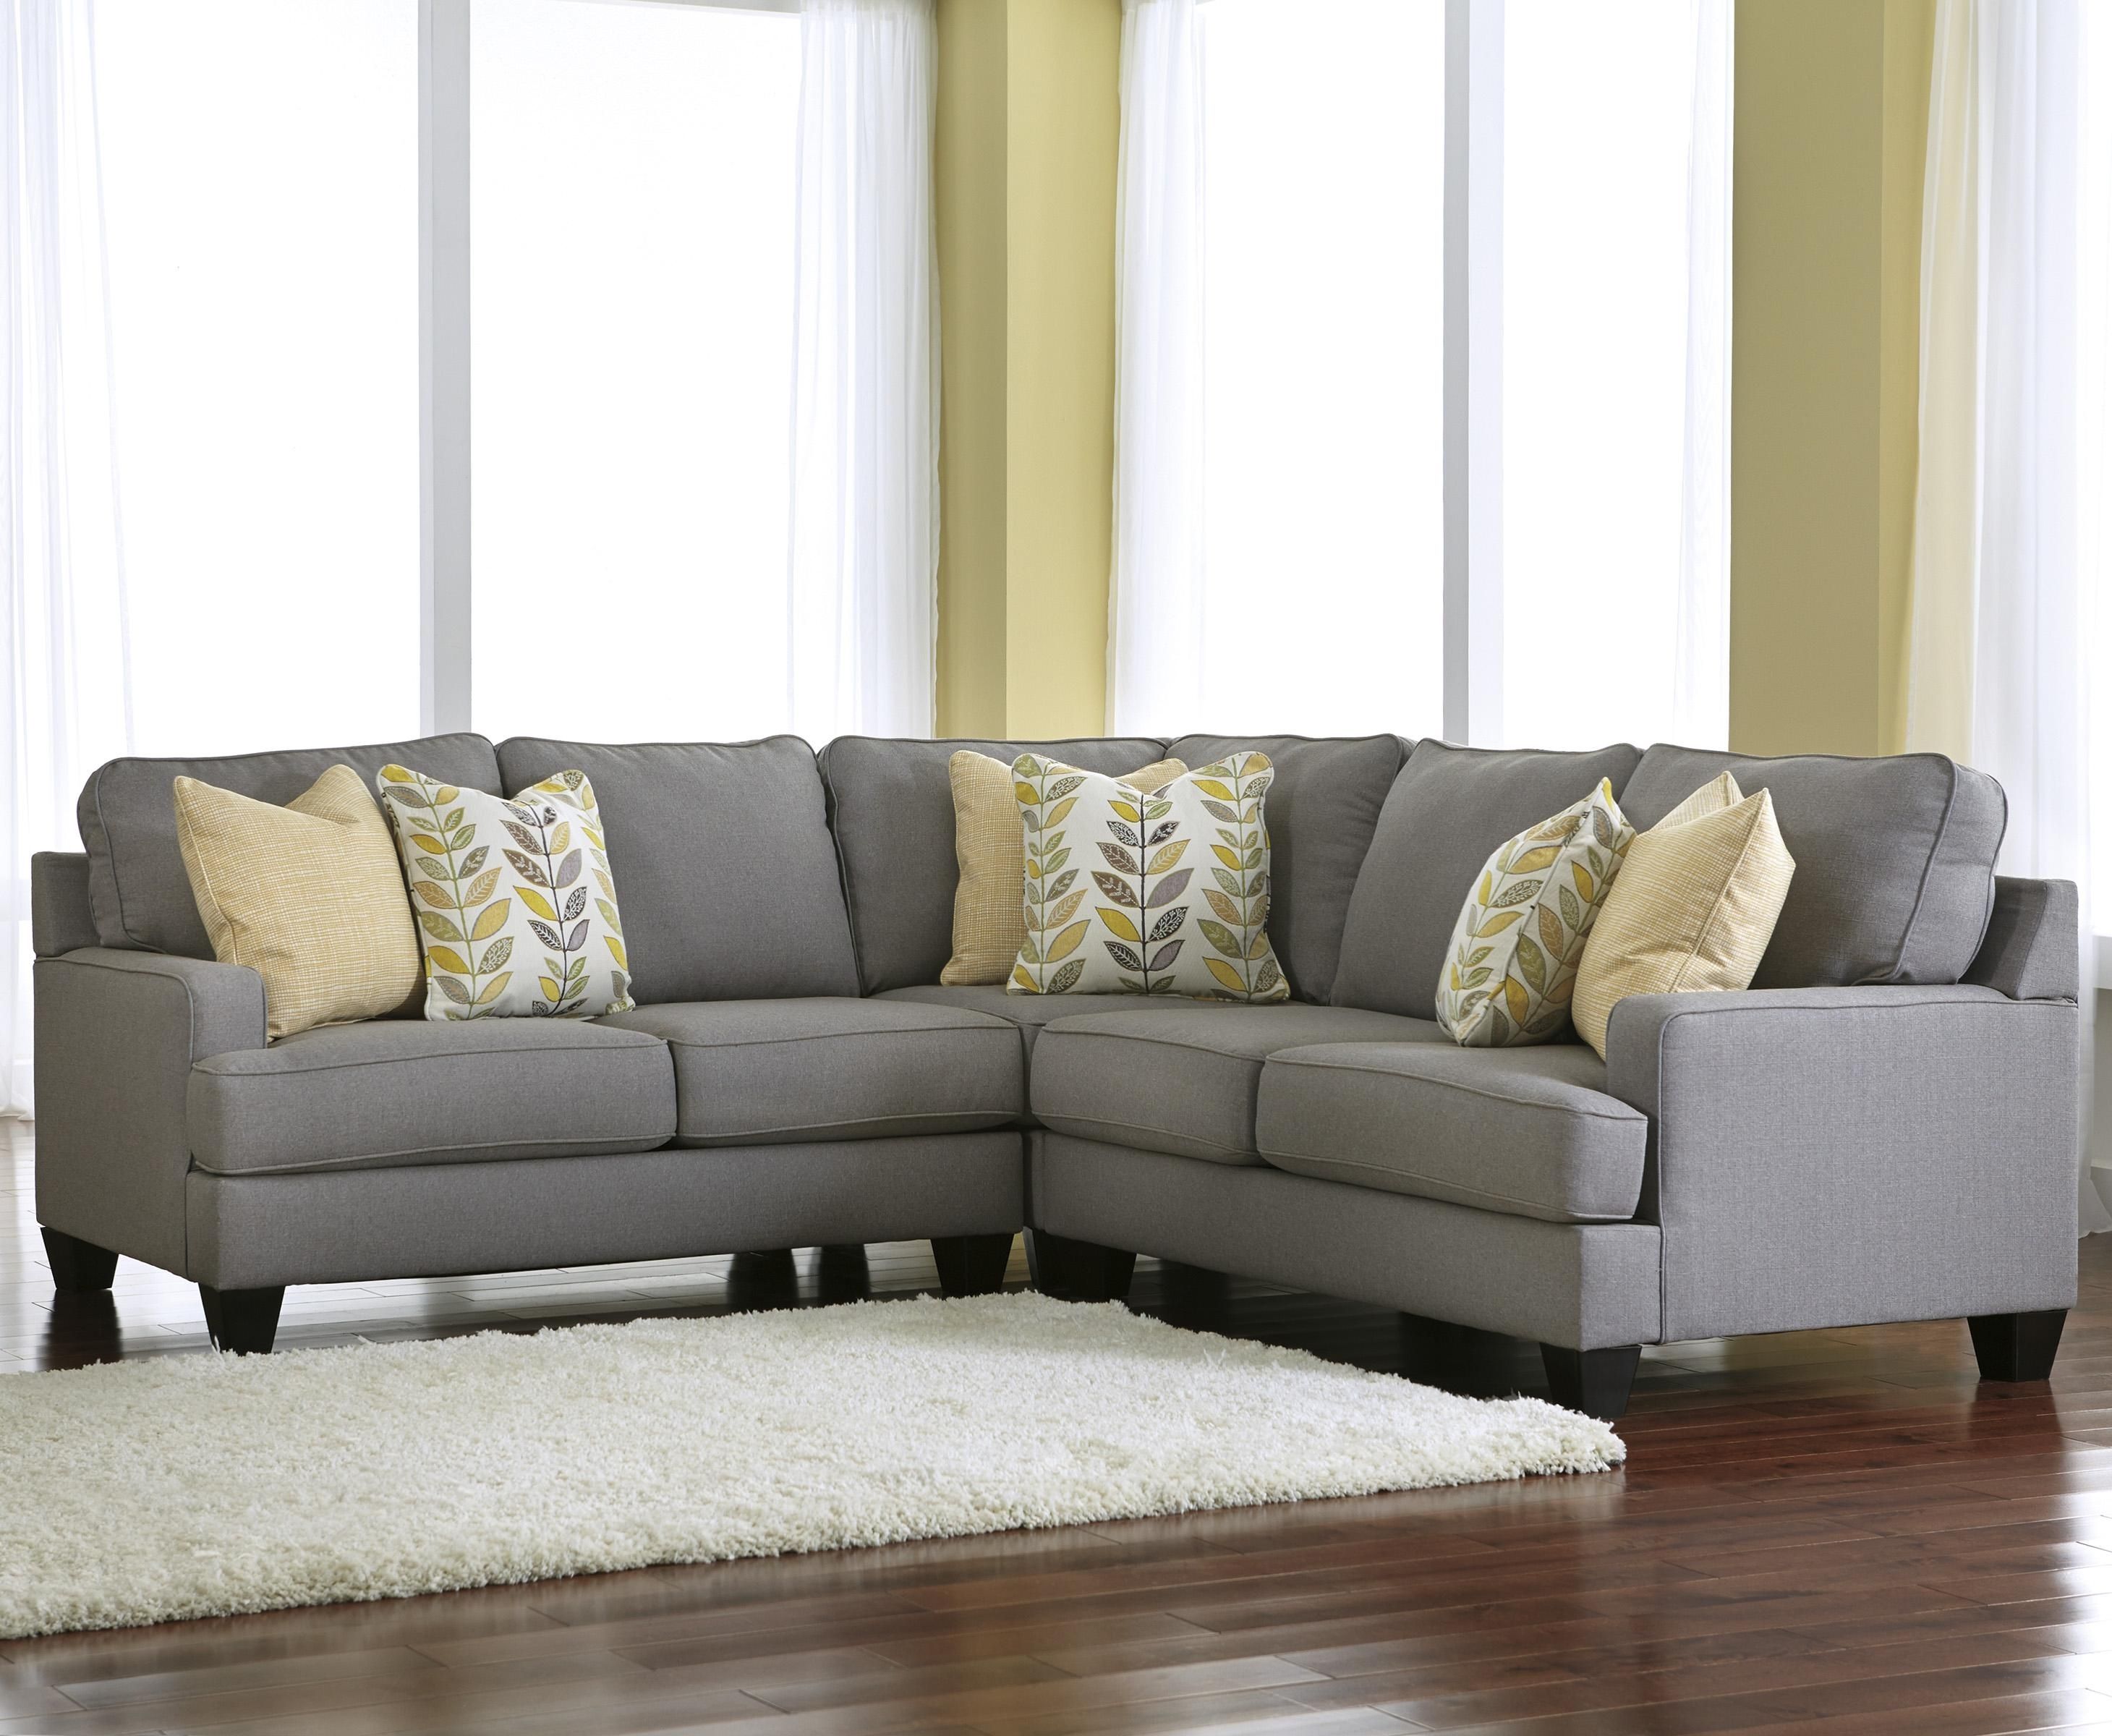 Featured Photo of 15 Best Collection of Sectional Sofas at Birmingham Al